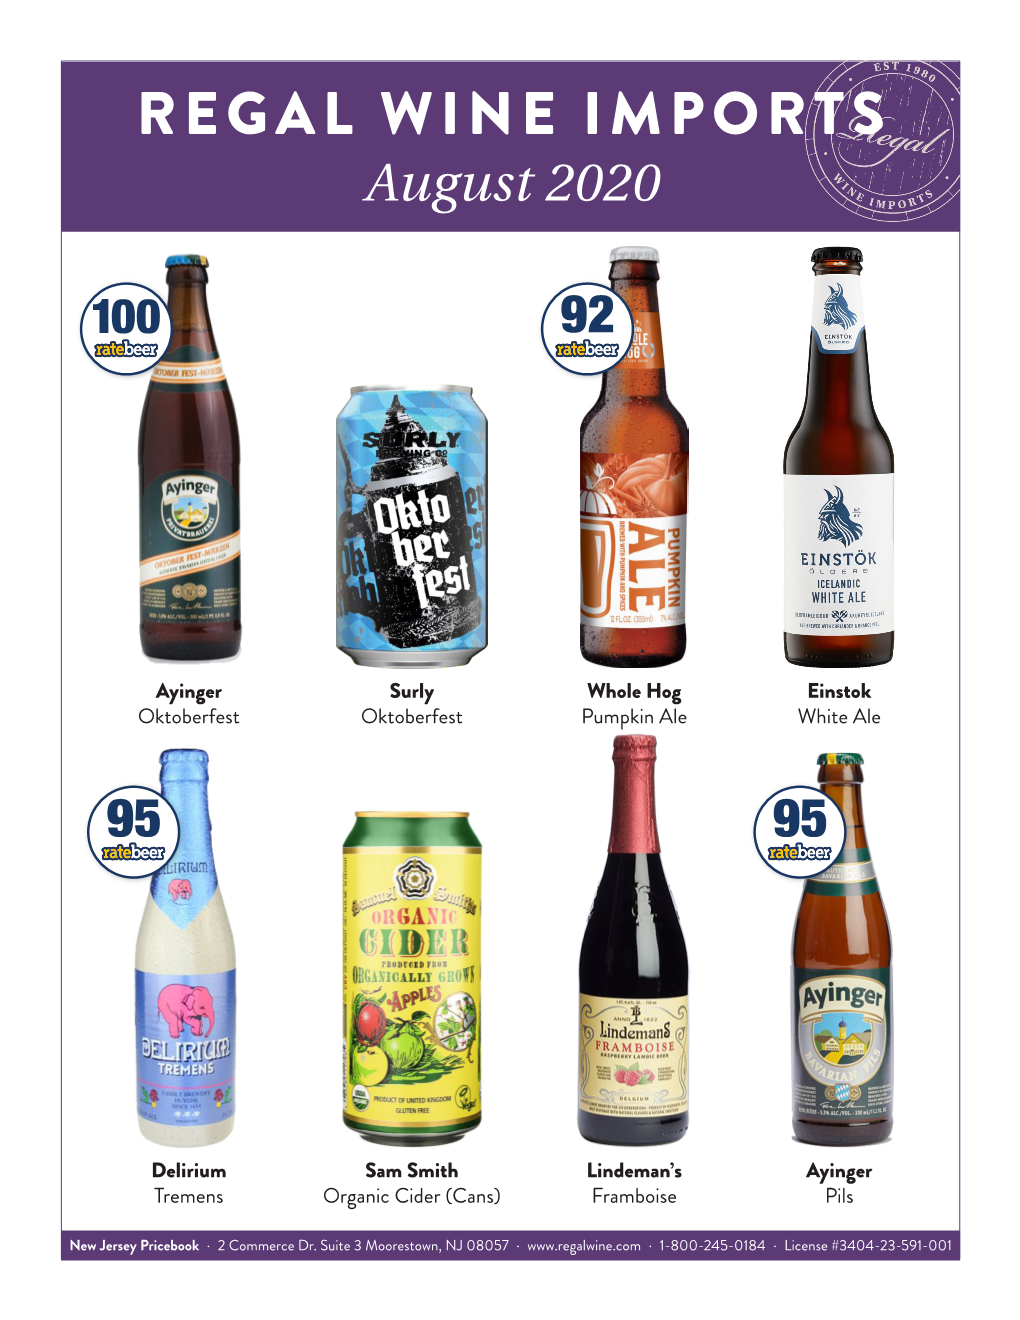 REGAL WINE IMPORTS August 2020